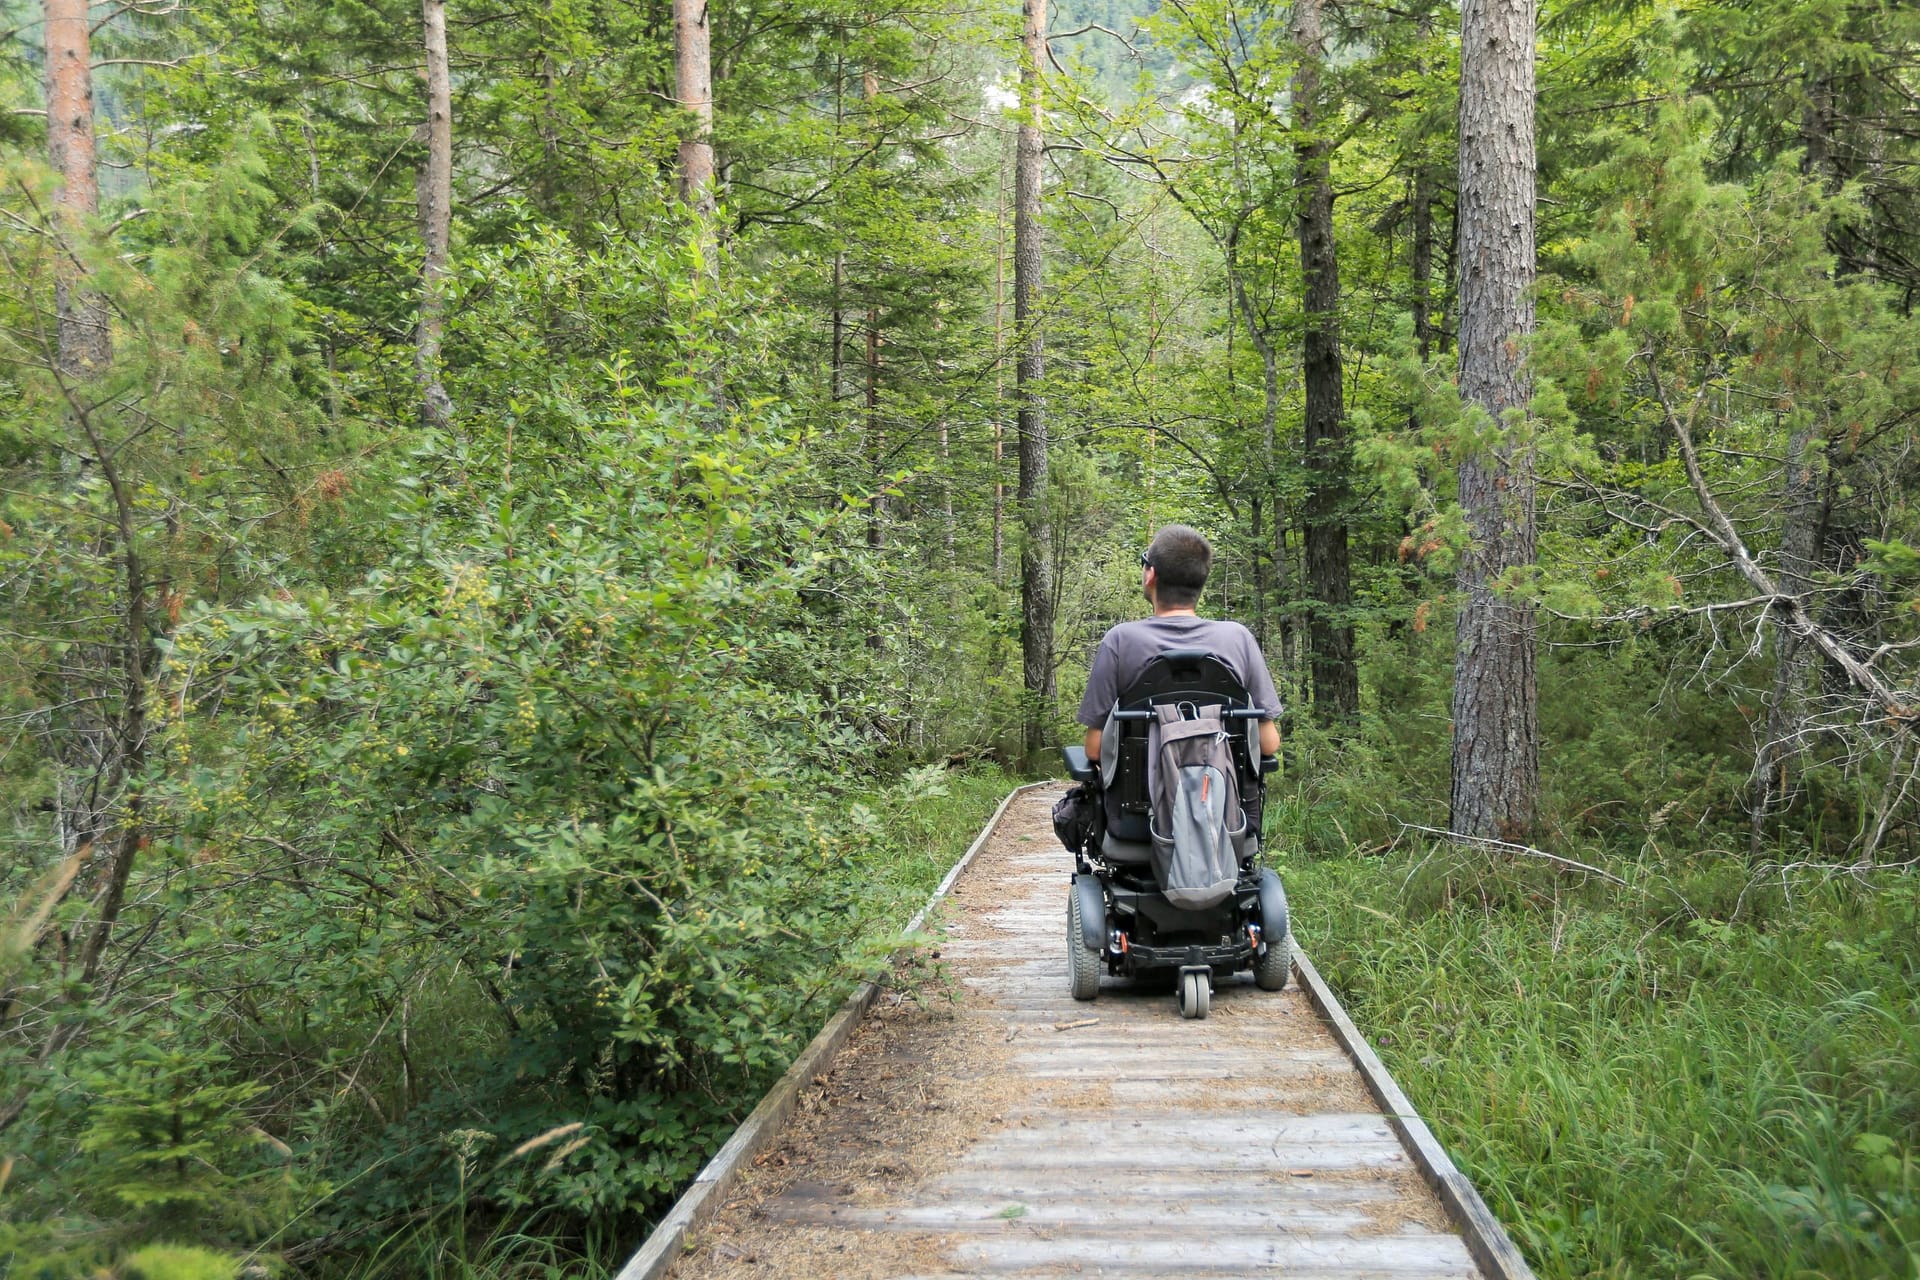 Happy man on wheelchair in nature. Exploring forest wilderness on an accessible dirt path.